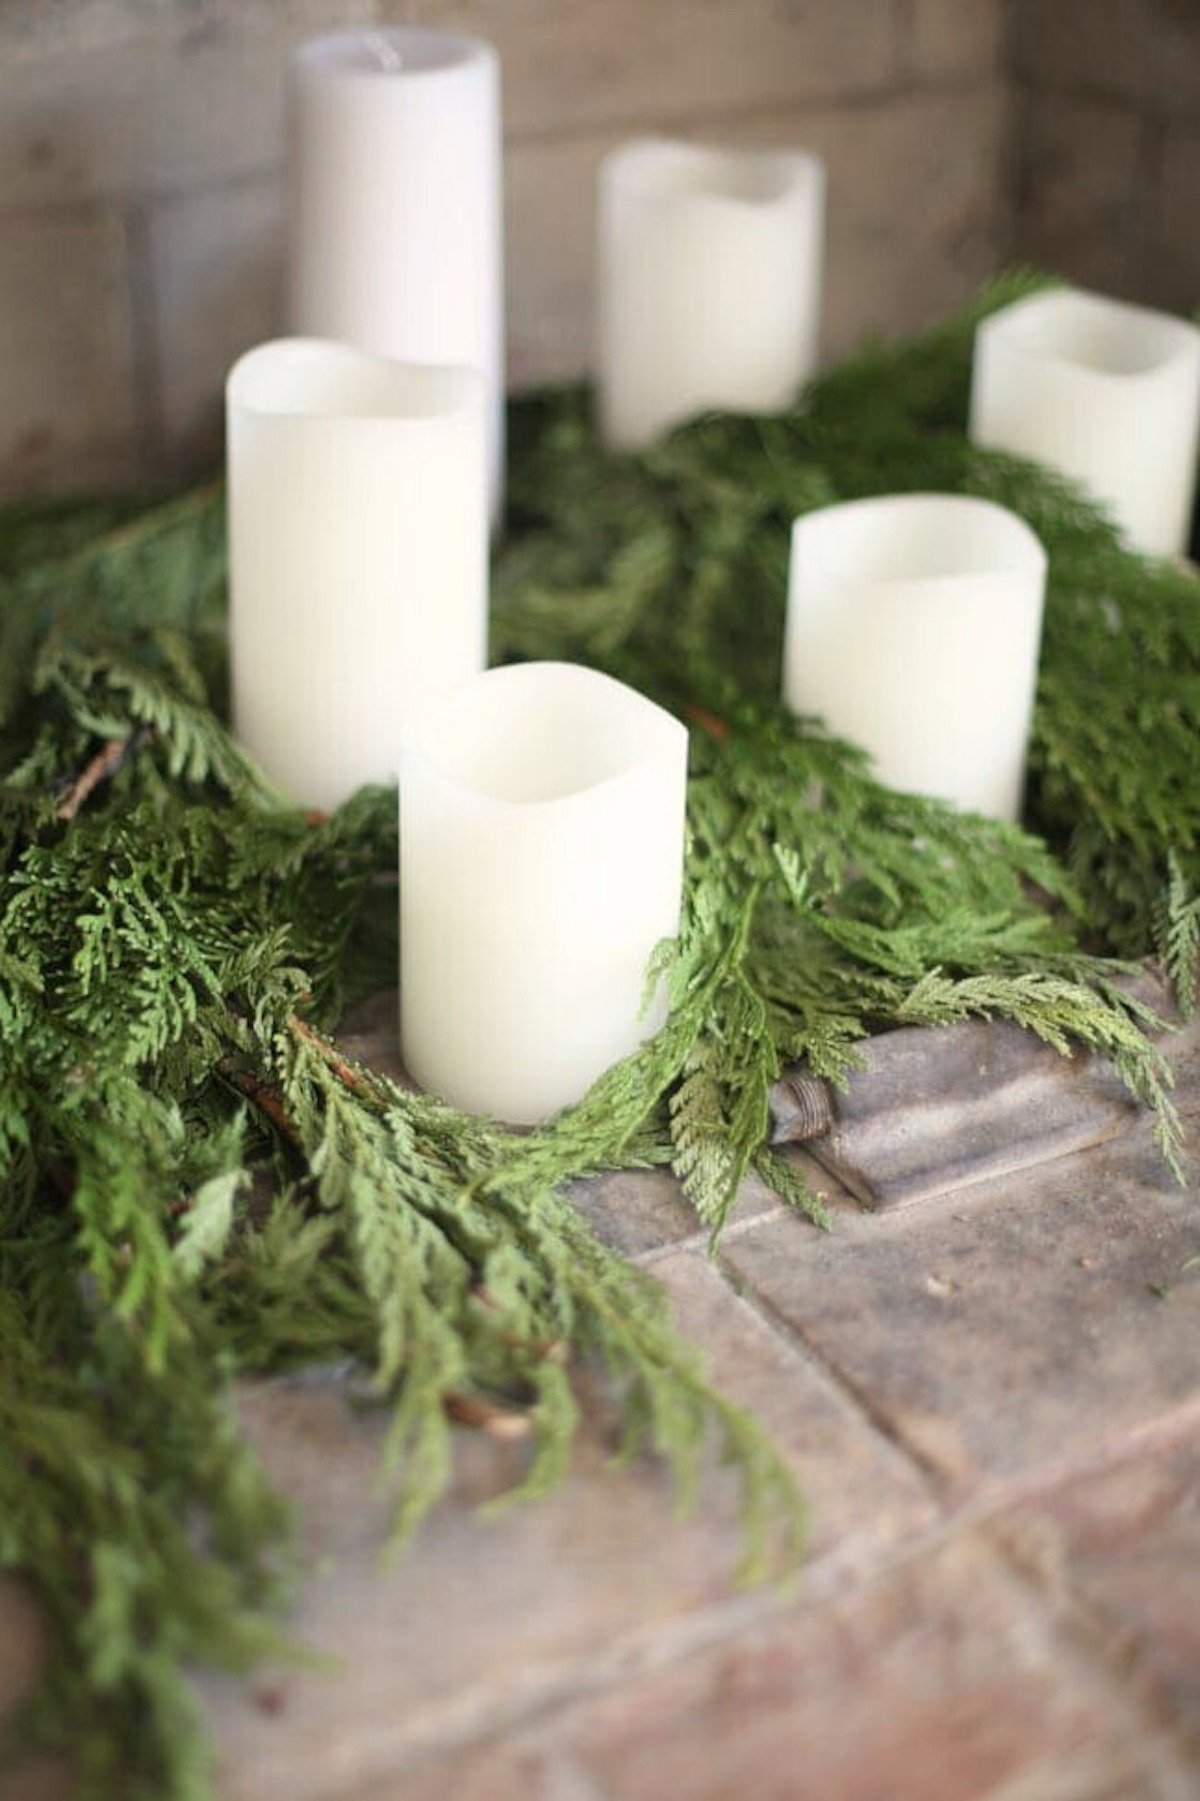 A mantle adorned with battery operated candles and greenery.